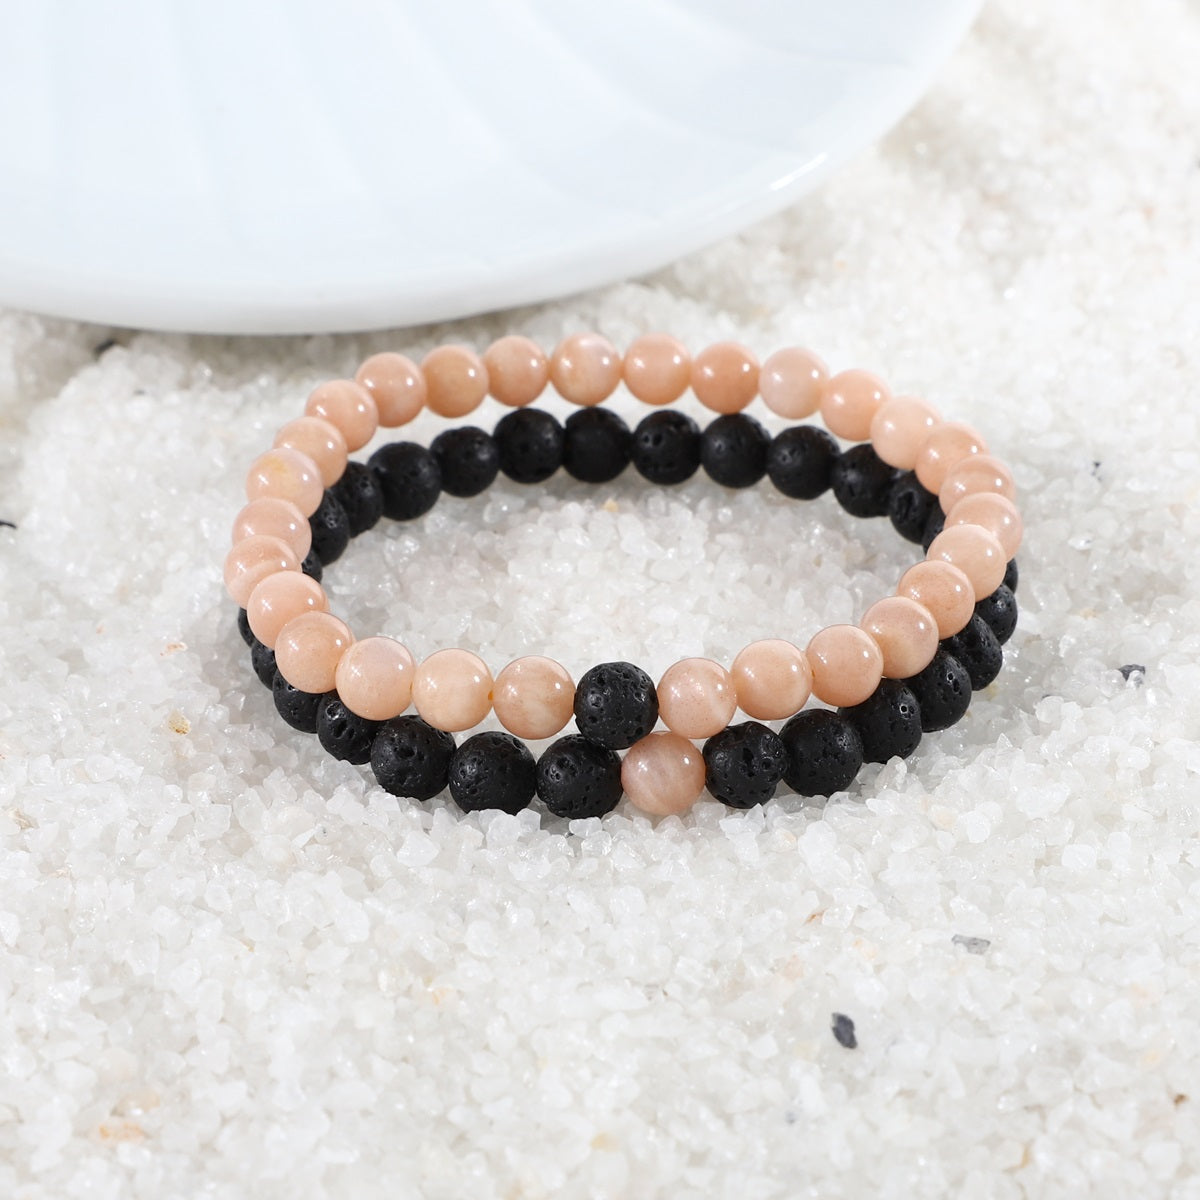 Visual representation of harmonious energy associated with the Peach Moonstone and Lava Bracelet Combo, combining elegance and emotional healing